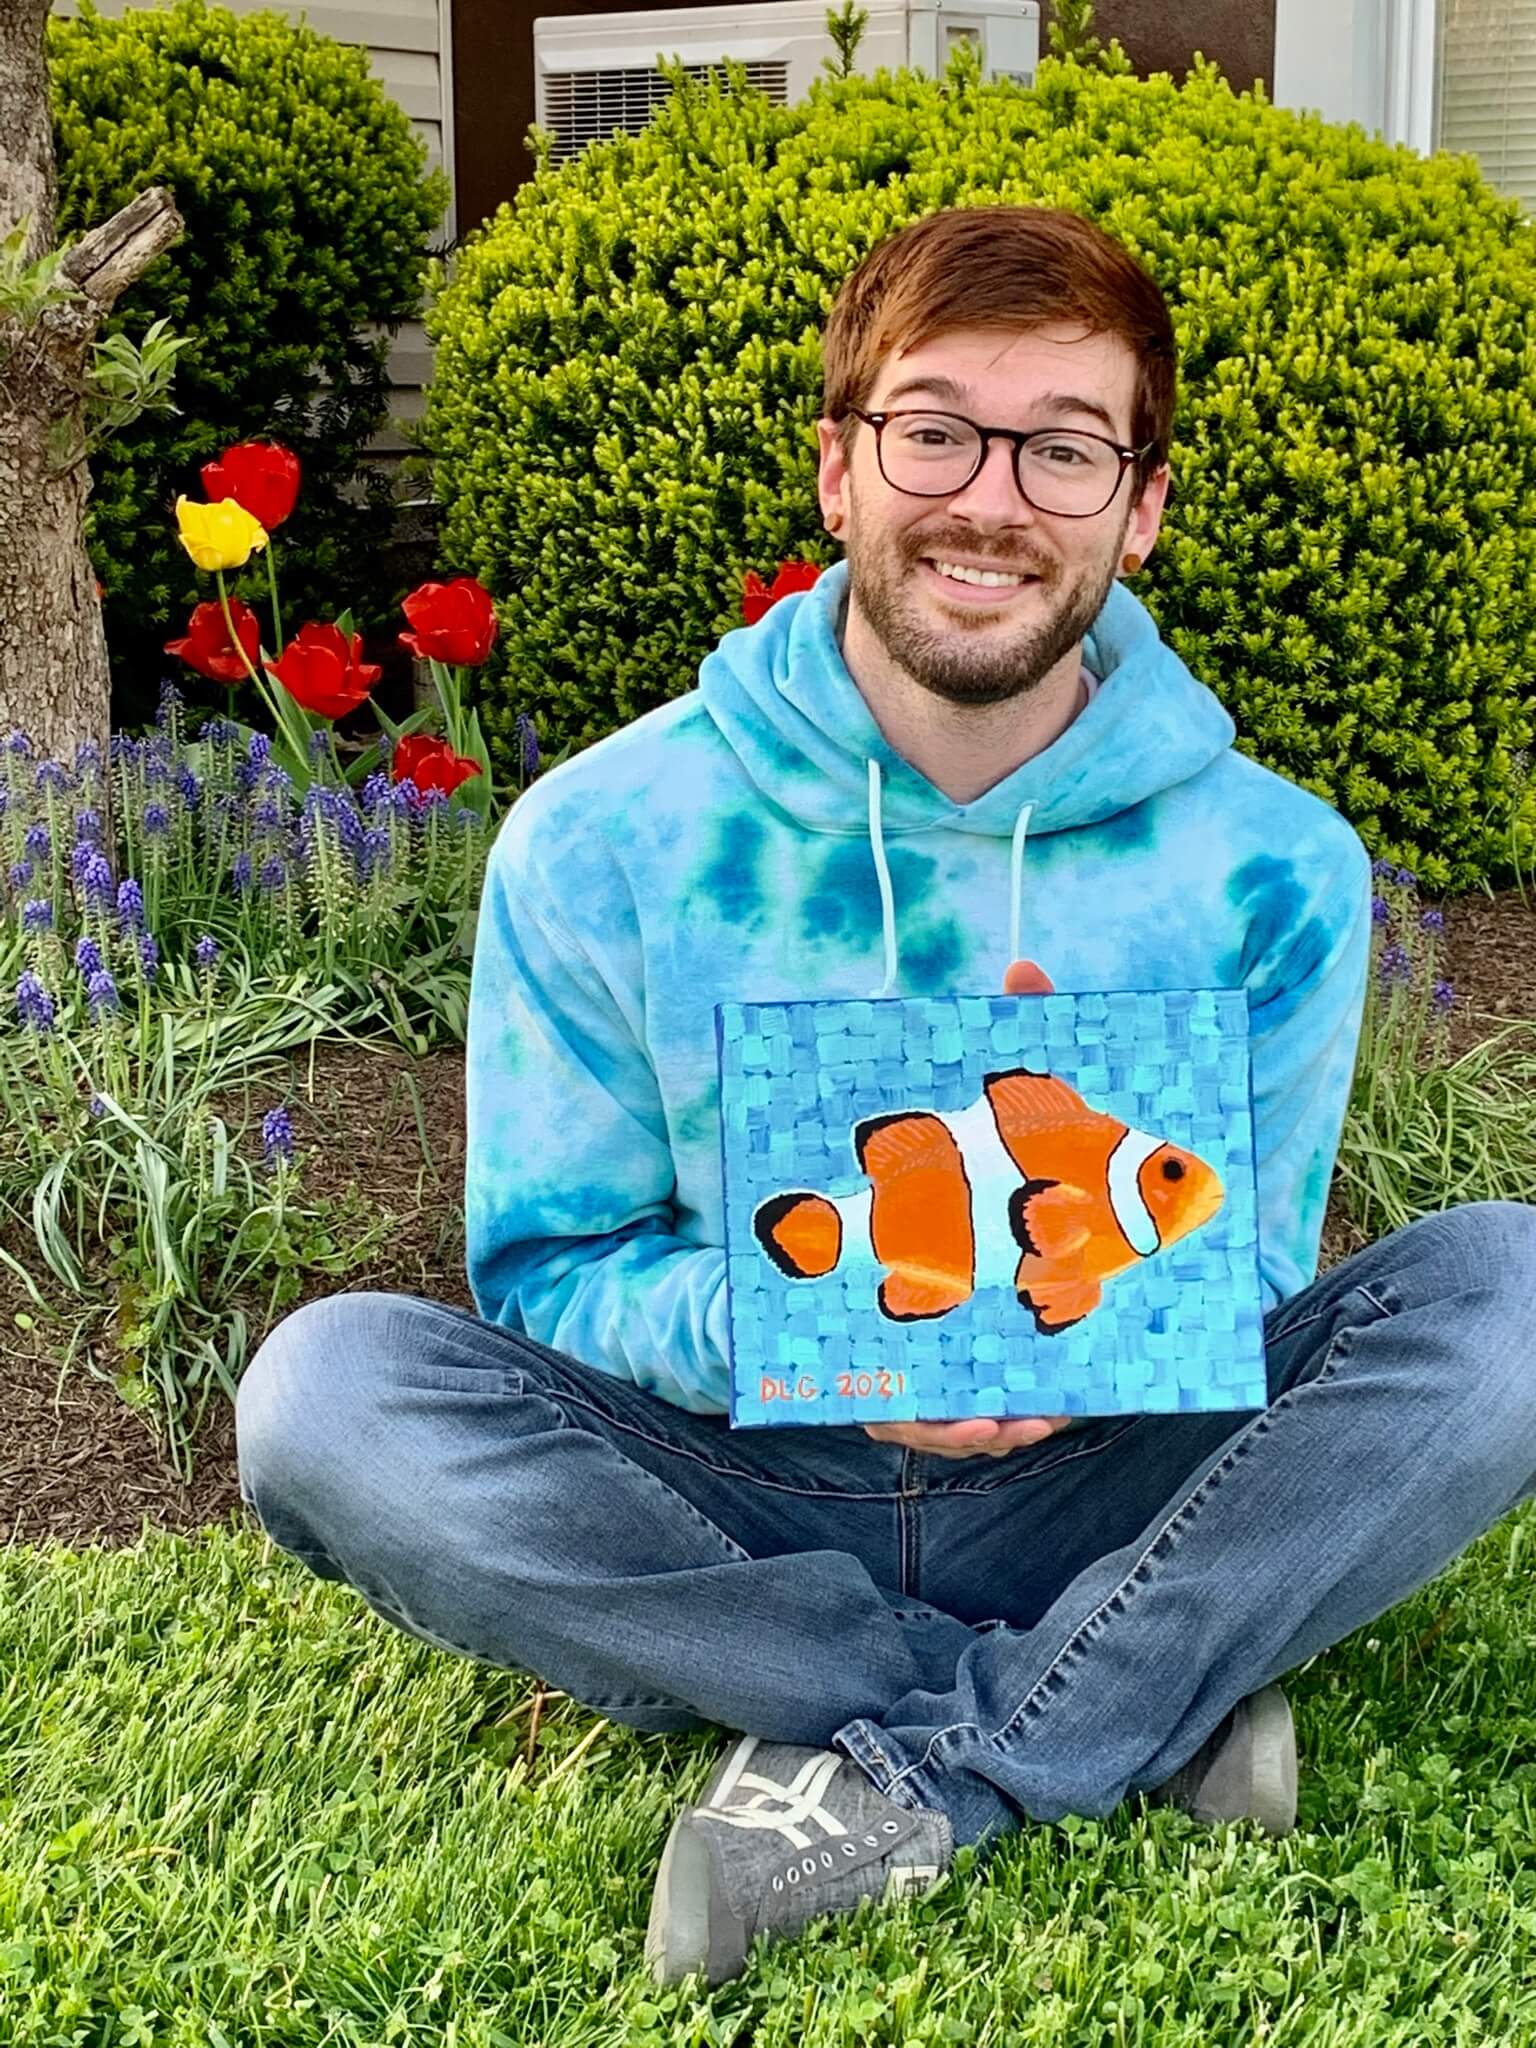 Dorrin Gingerich sitting on grass, gently holding a clownfish painting in his hands.